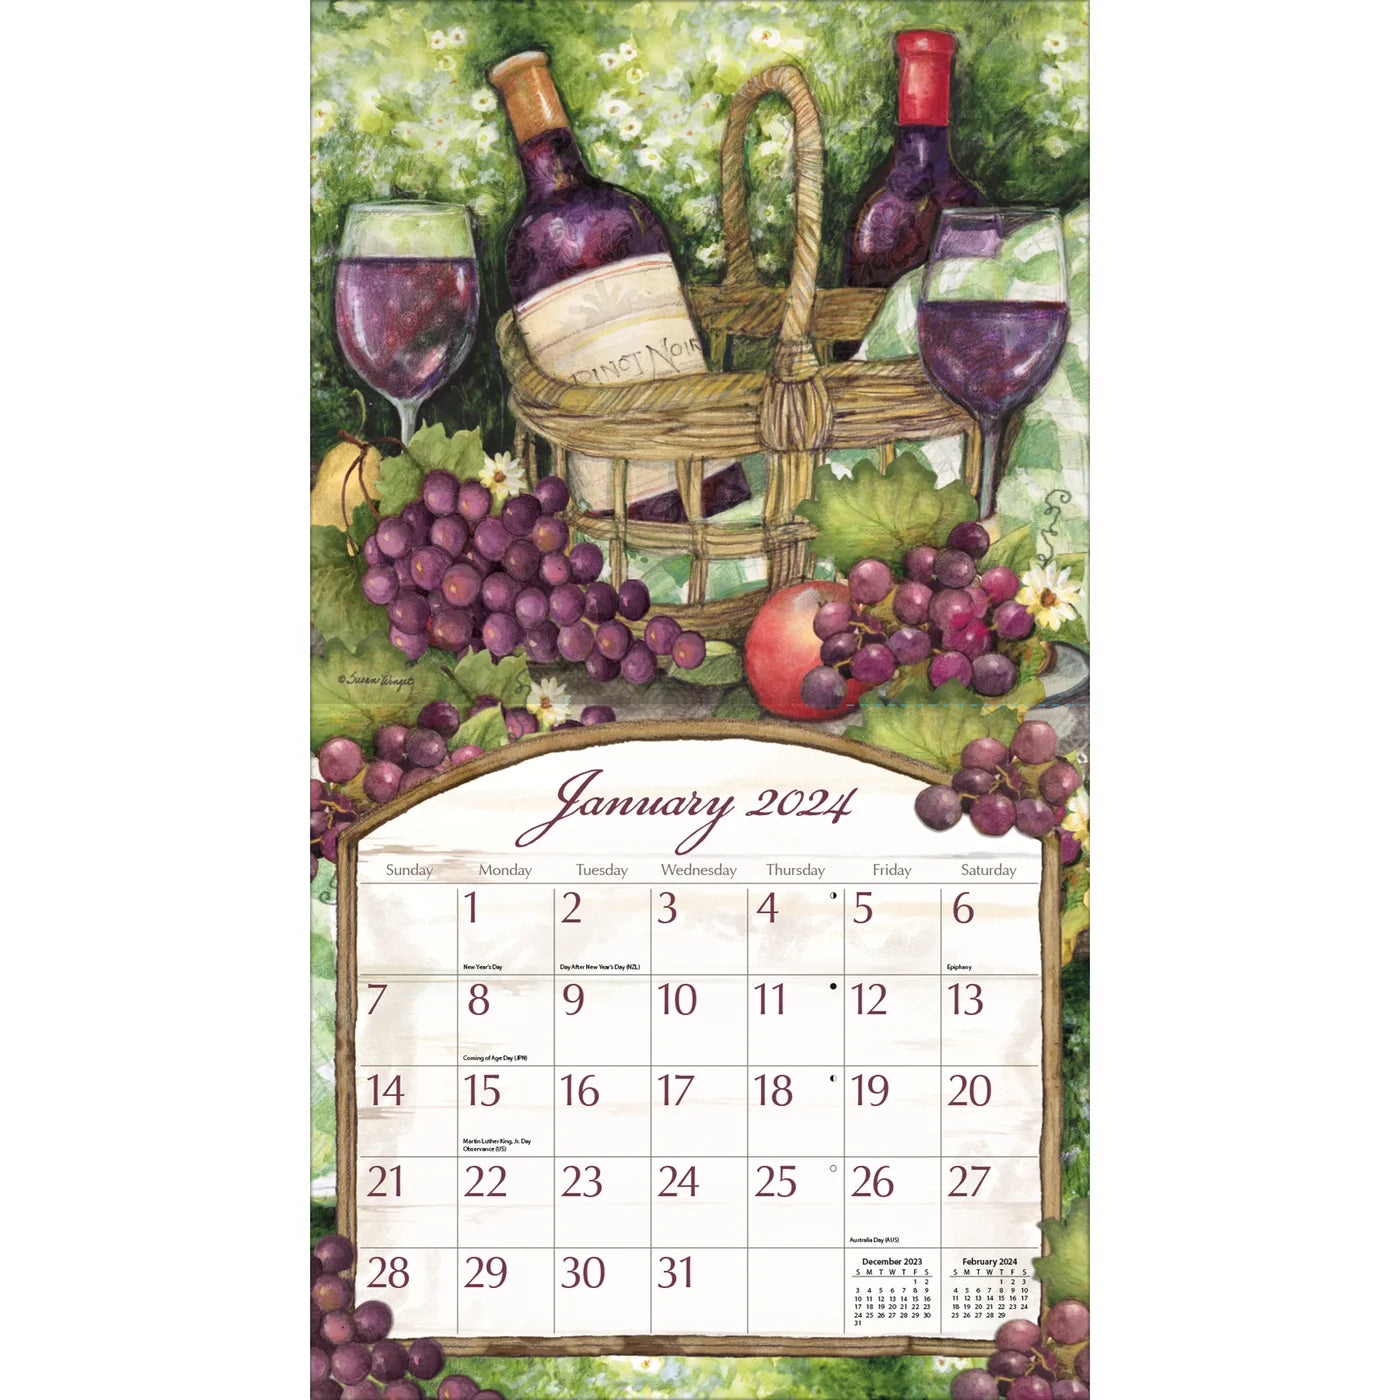 2024 LANG Wine Country By Susan Winget - Deluxe Wall Calendar